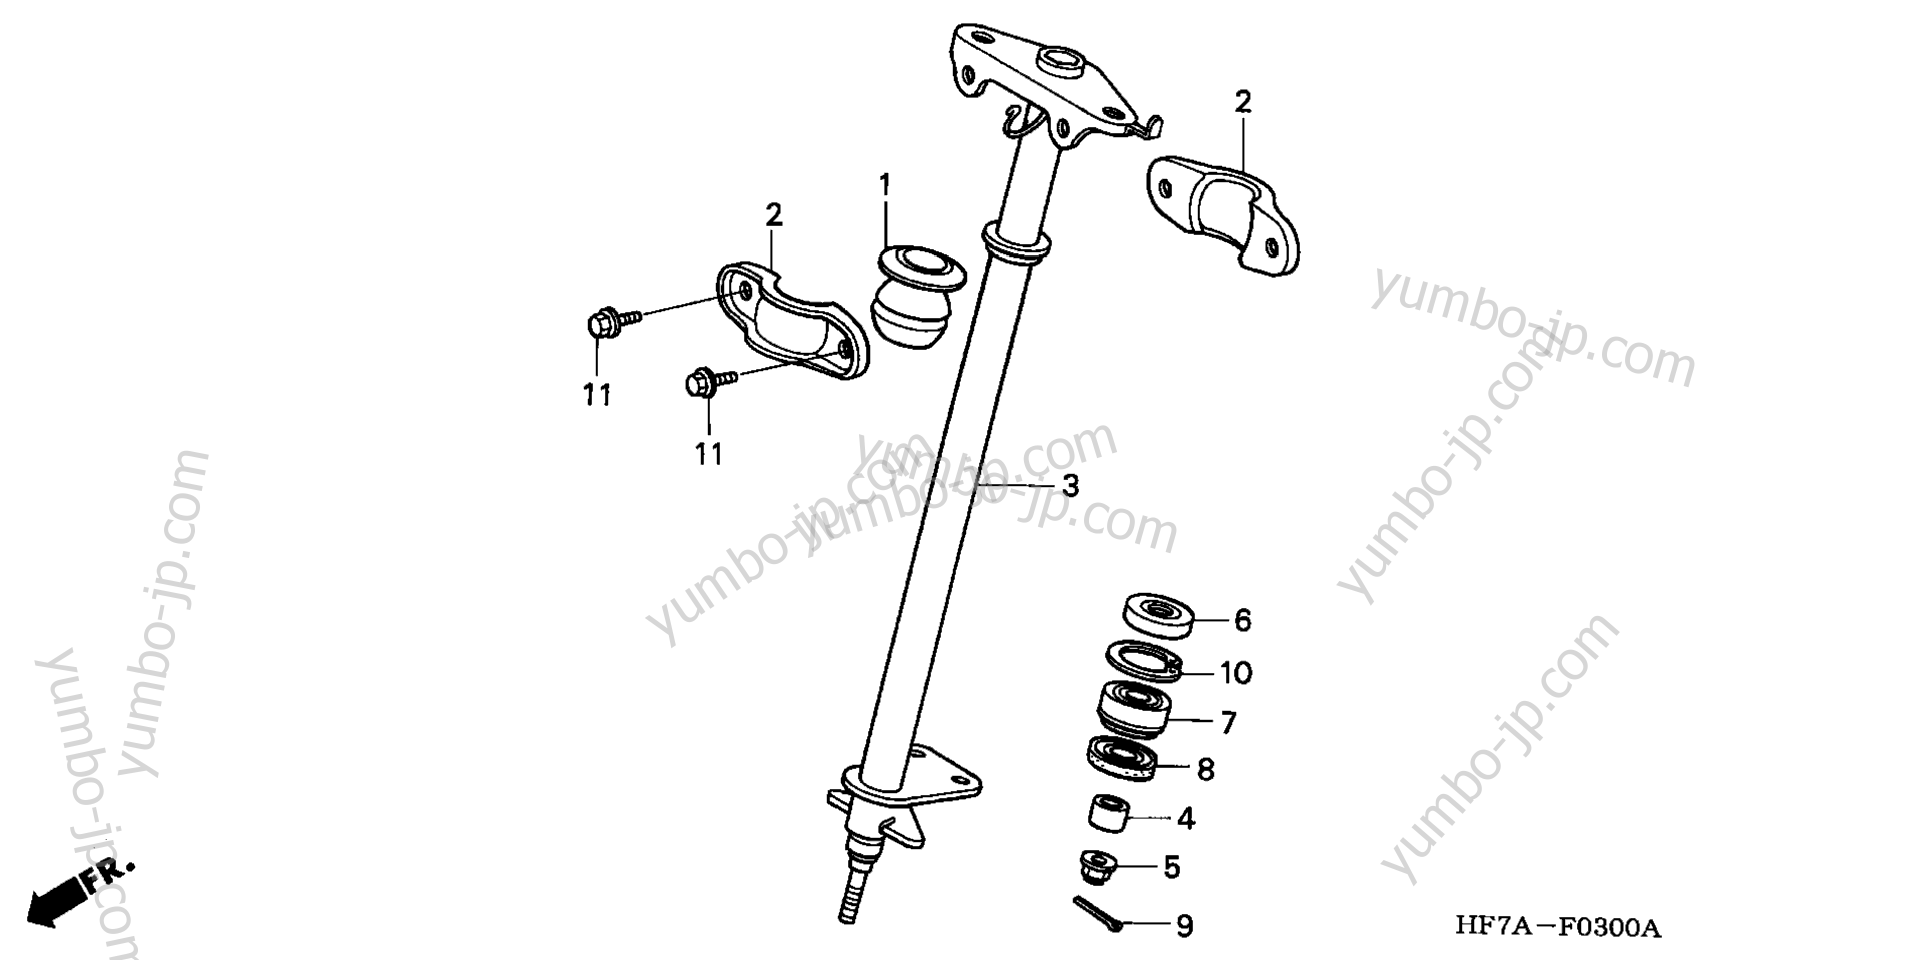 STEERING SHAFT for ATVs HONDA TRX90 A 2001 year